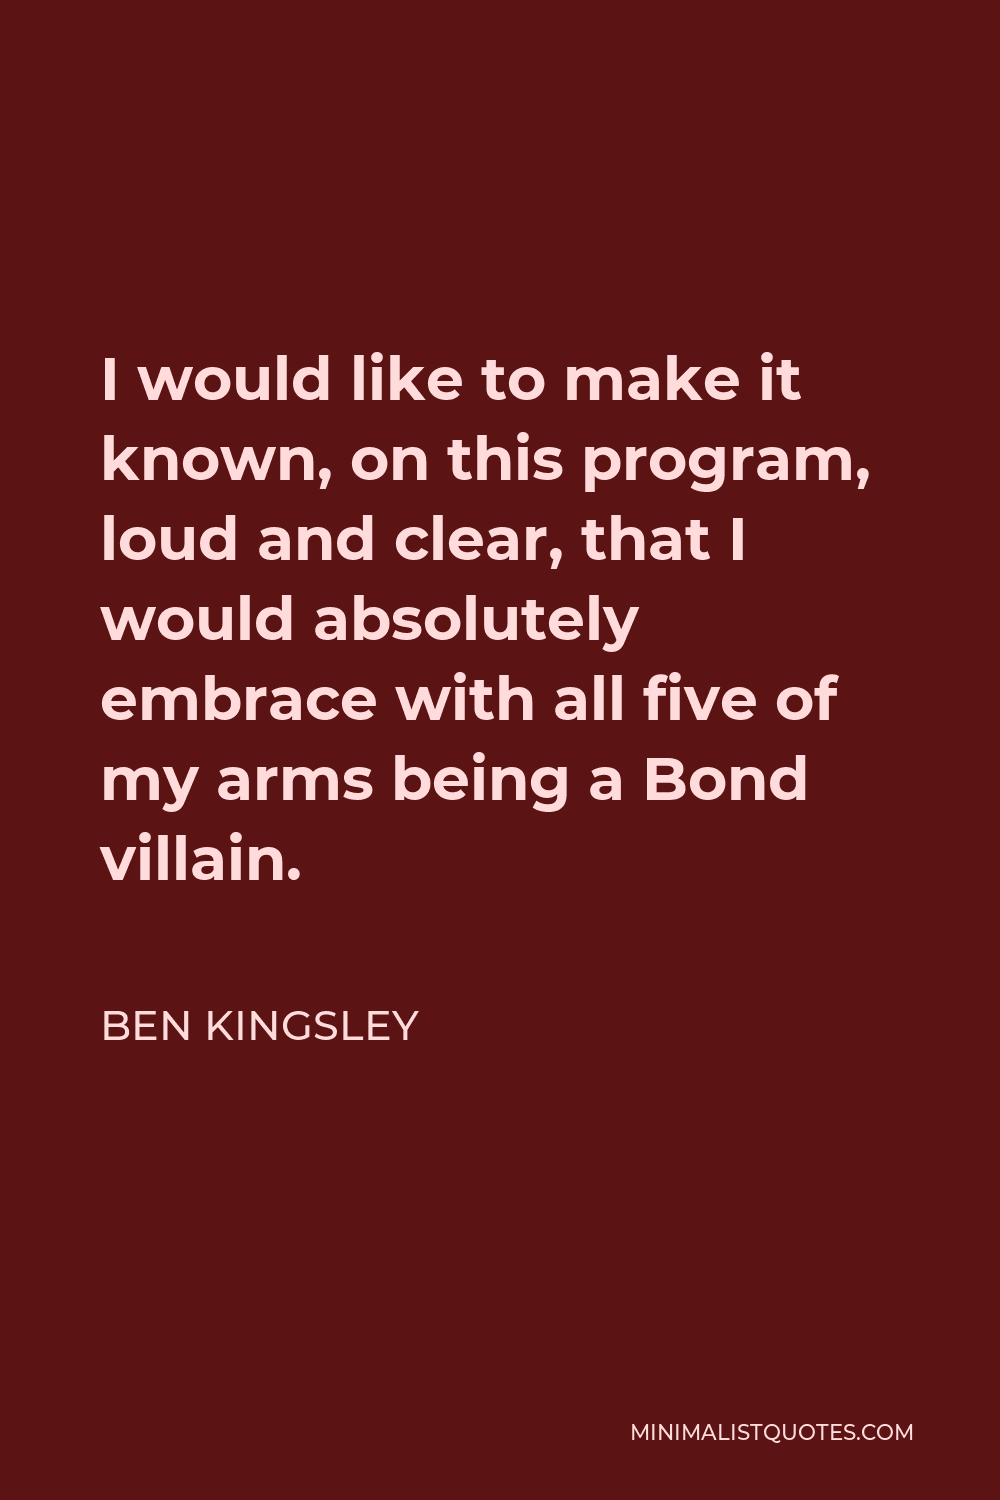 Ben Kingsley Quote - I would like to make it known, on this program, loud and clear, that I would absolutely embrace with all five of my arms being a Bond villain.